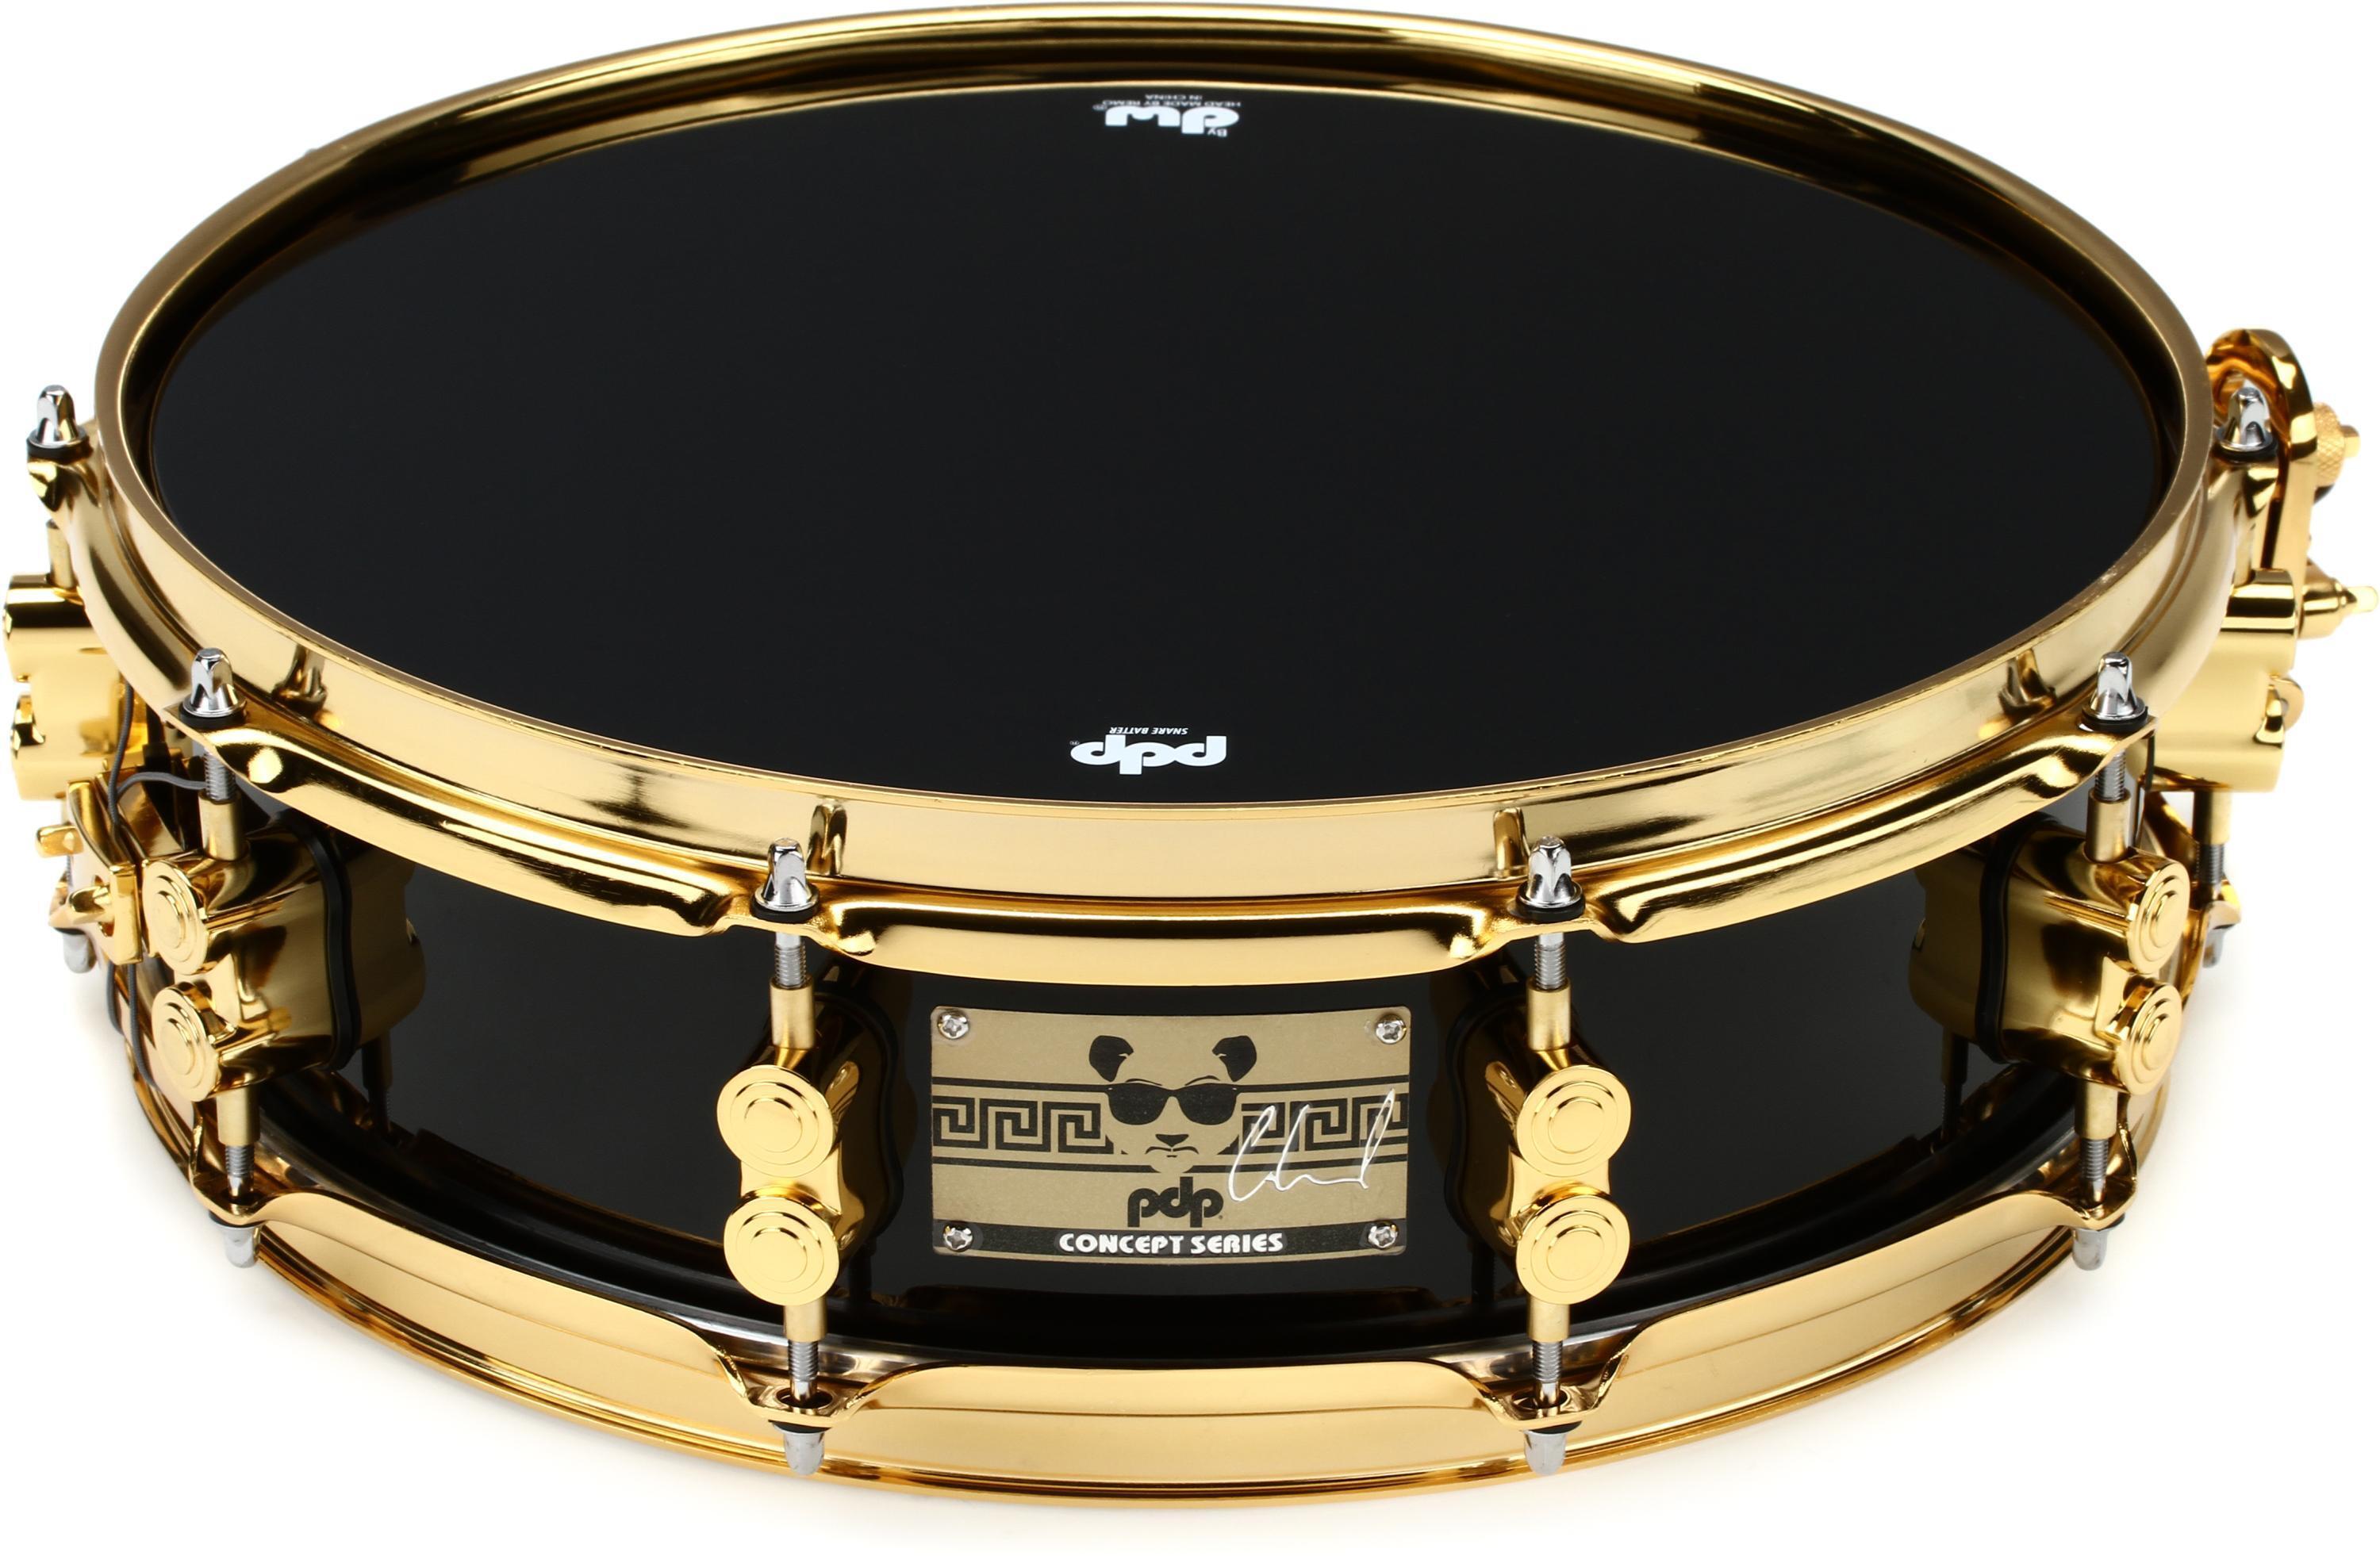 Eric Hernandez Signature Snare Drum - 4 x 14 inch - Black with